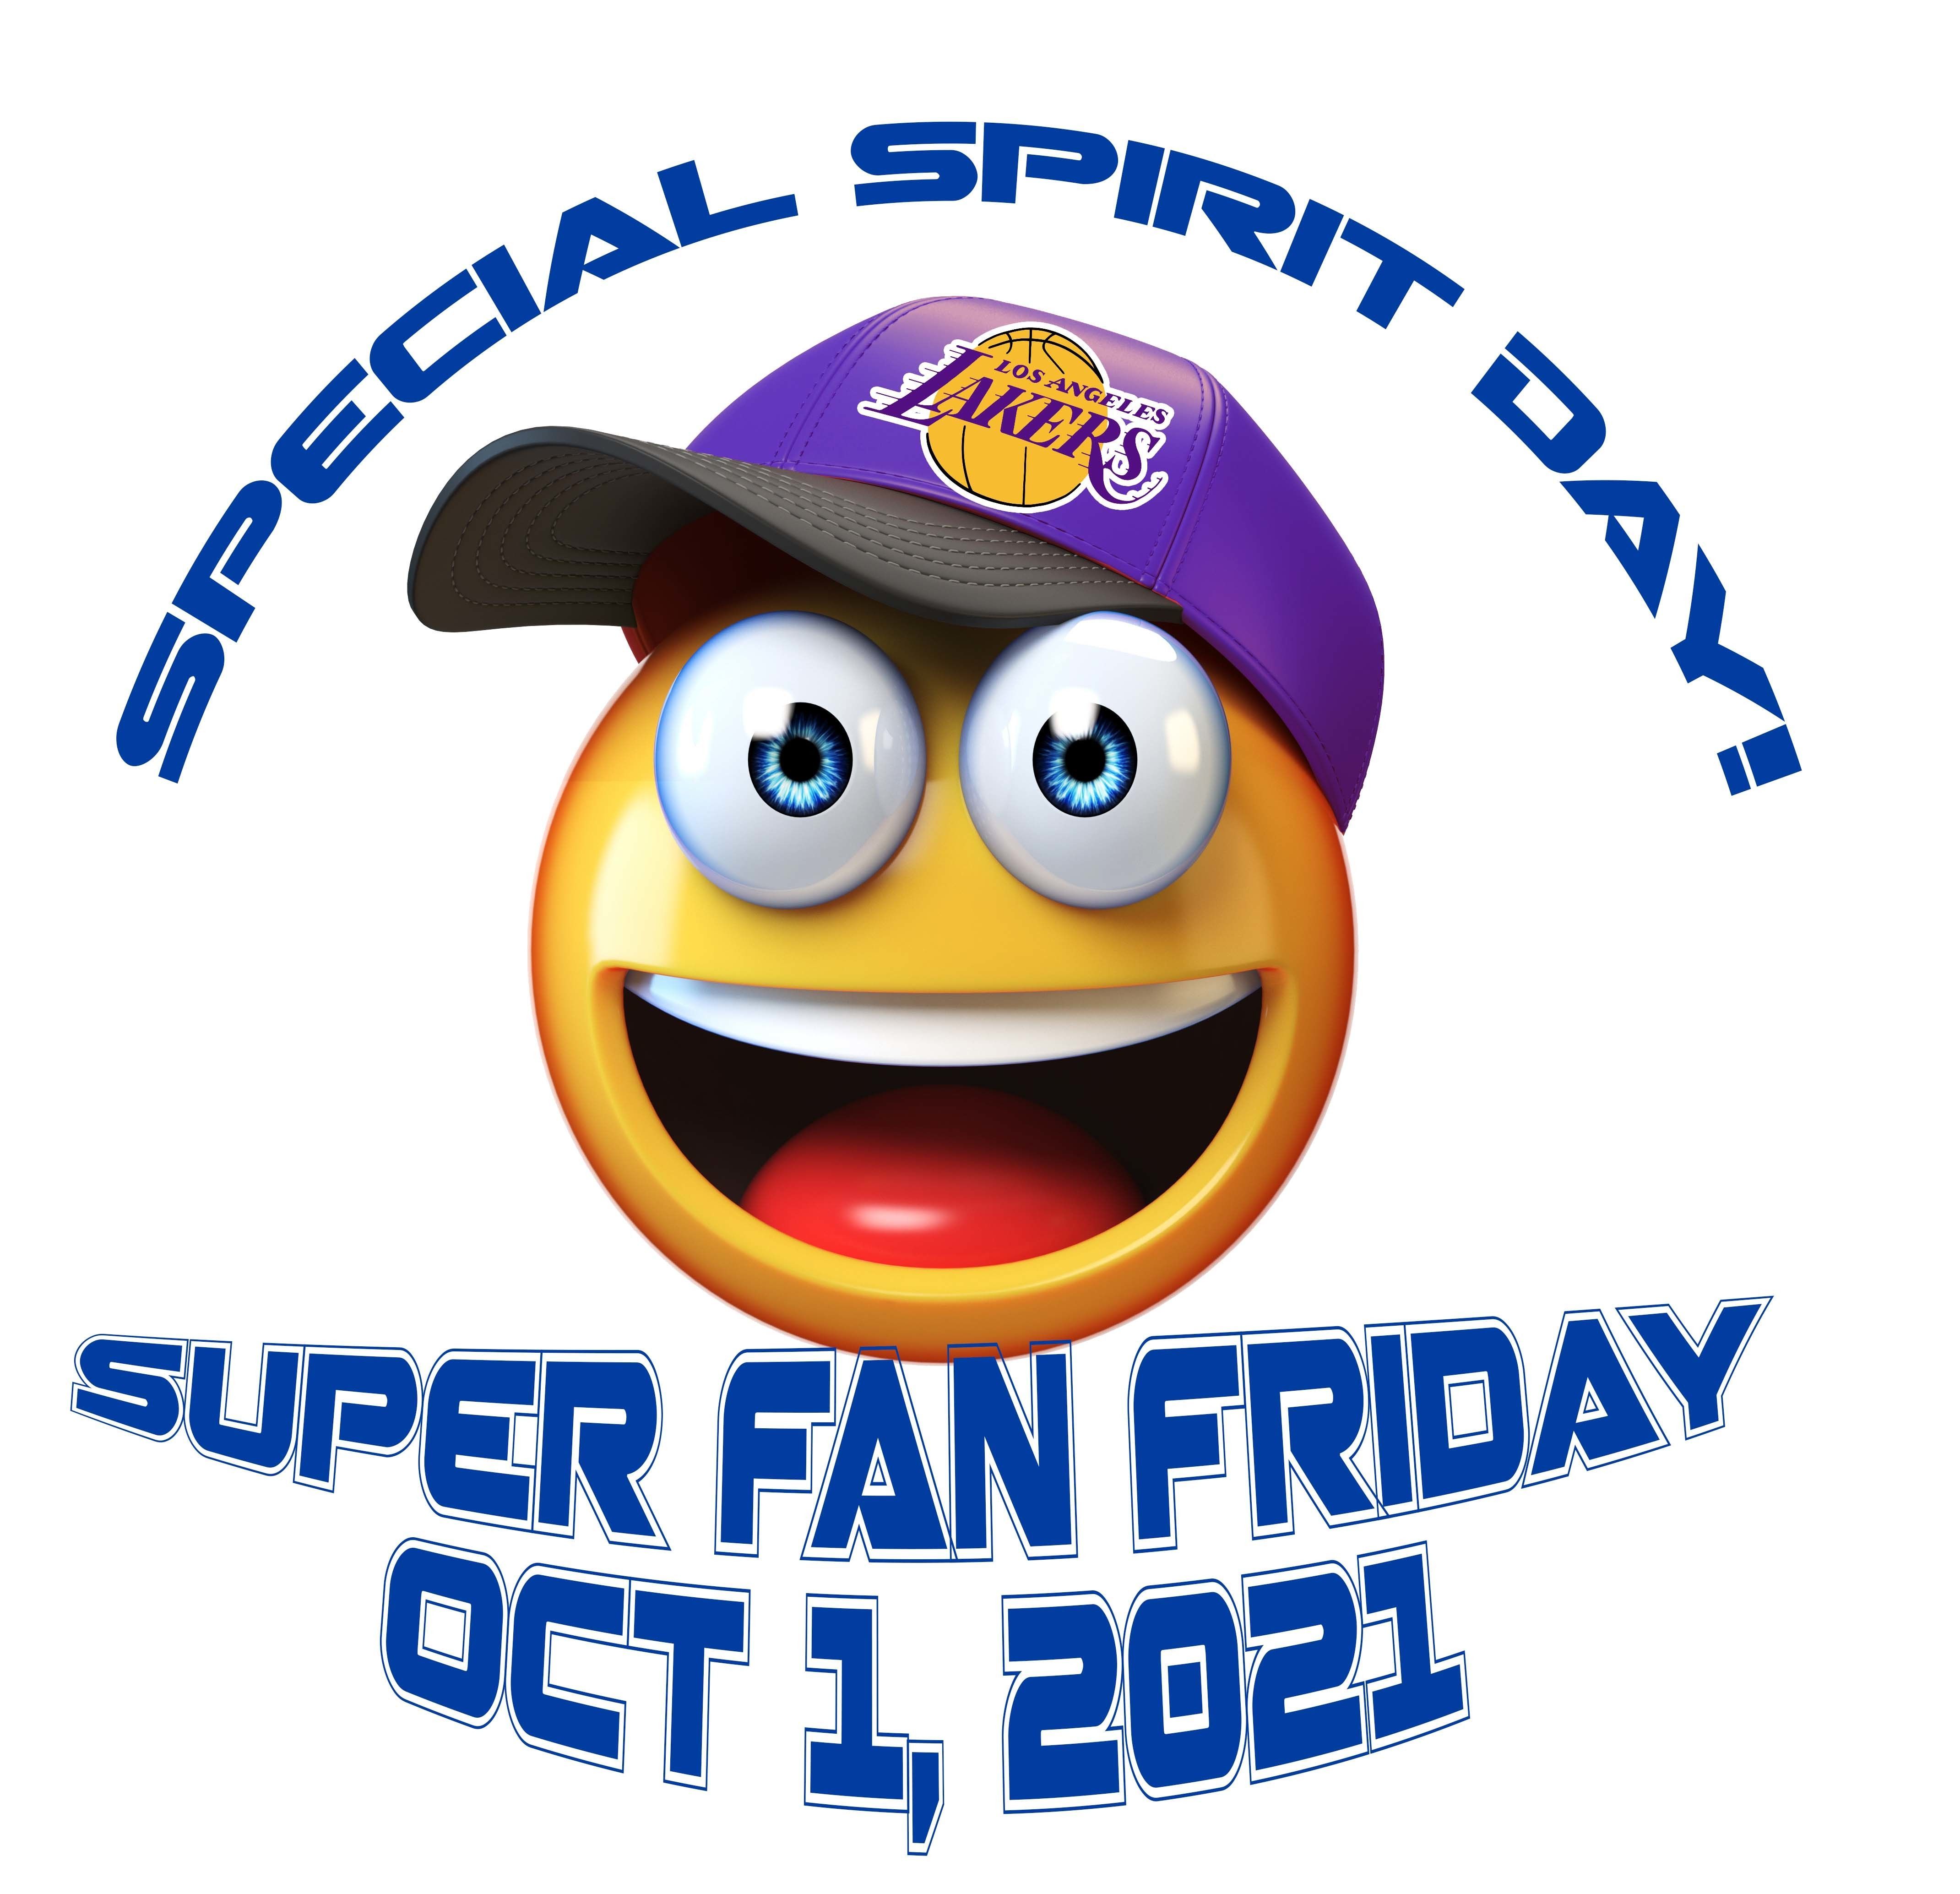 Super Fan Friday! Attention all students! Starting in October, the first Friday of every month will be a special Spirit Day! Get ready for Super Fan Friday on October 1st. Rep your favorite sports team or athlete! 